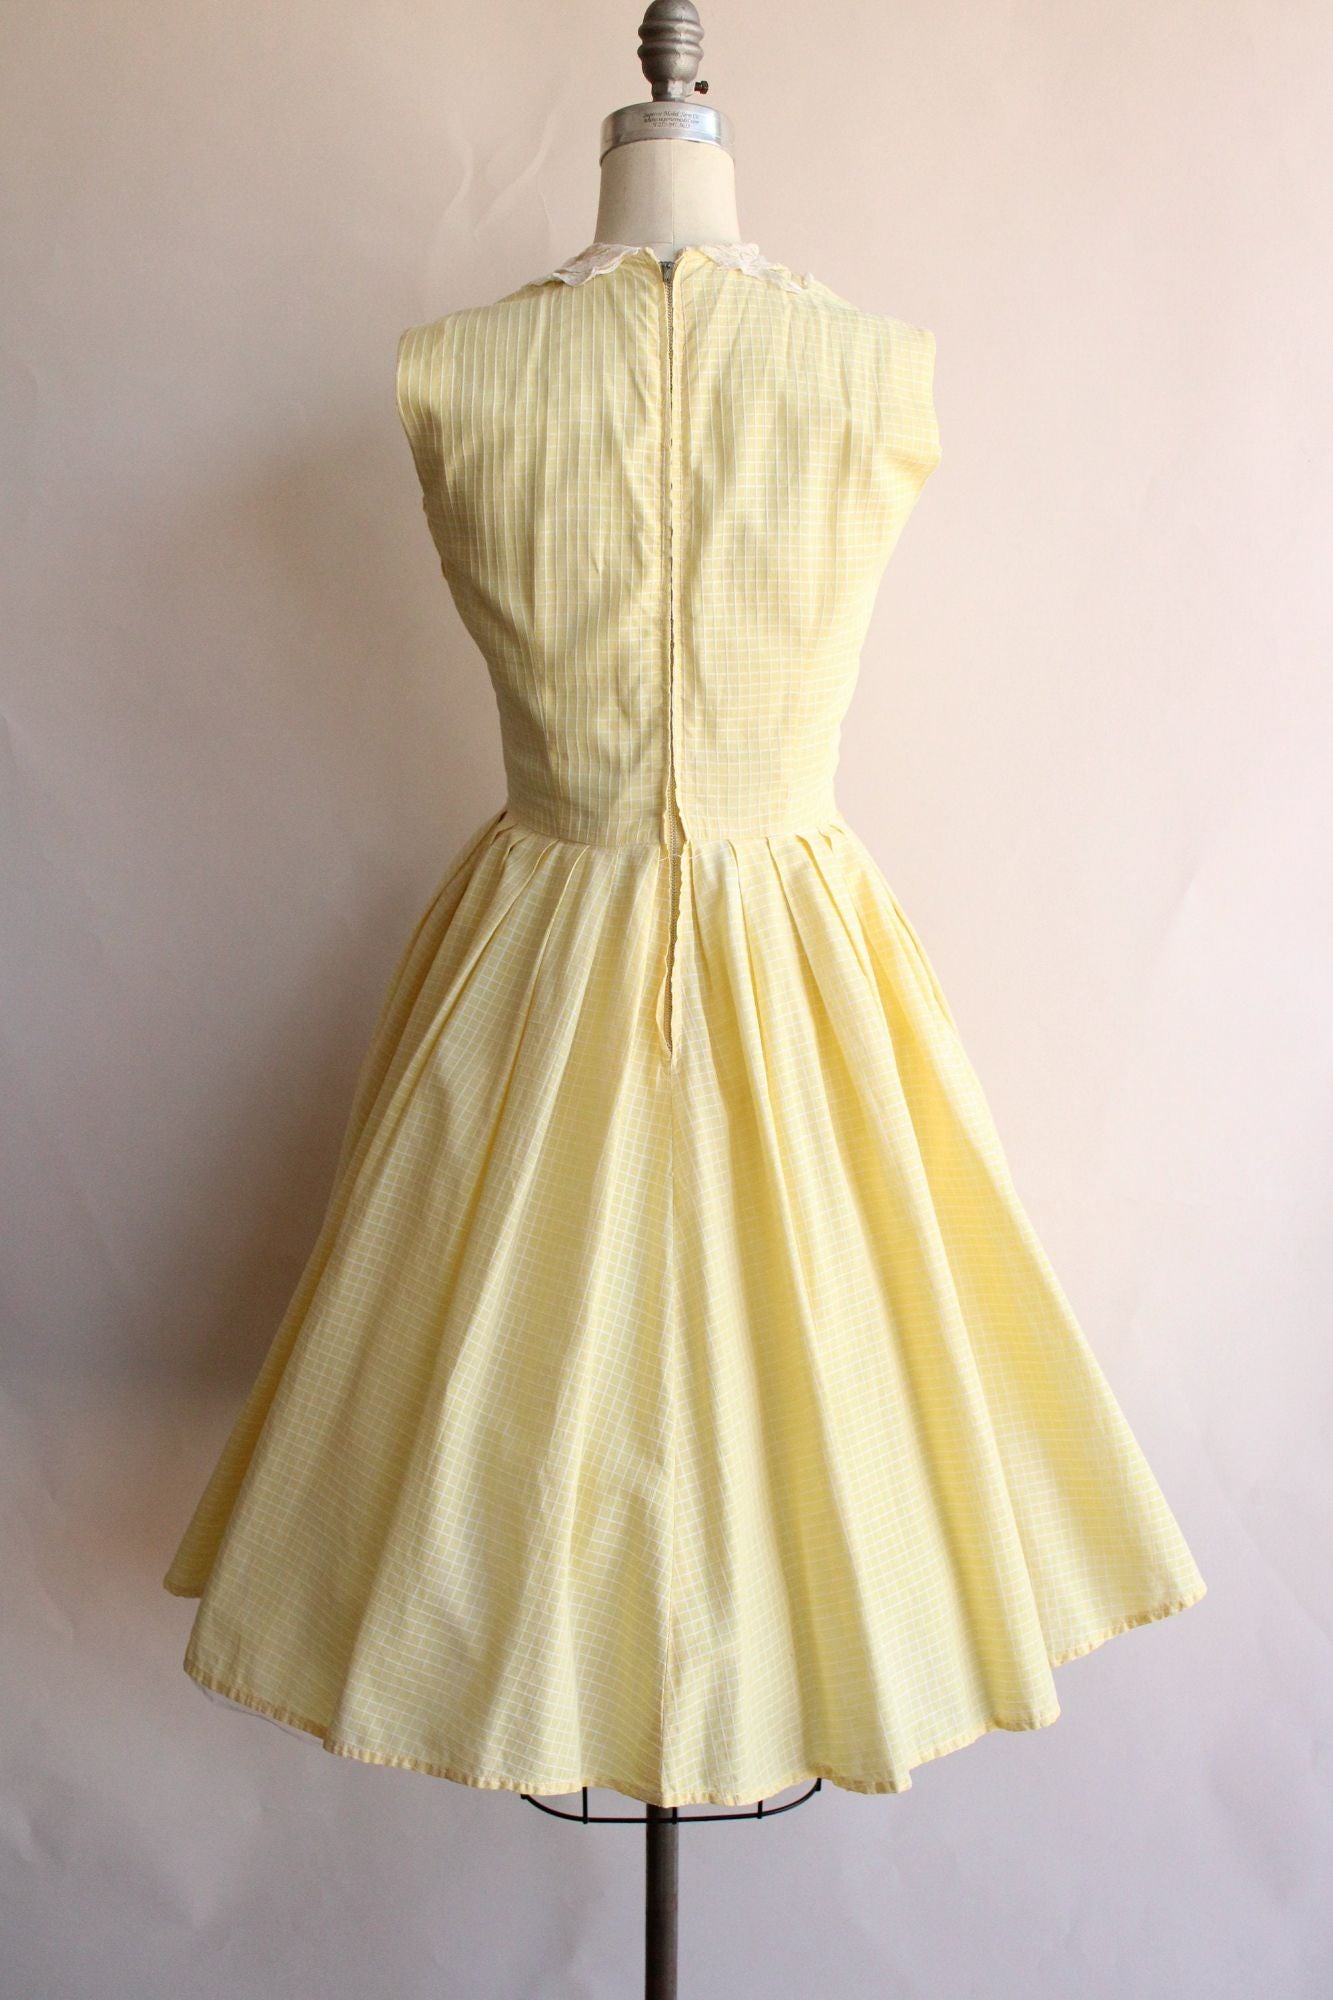 Vintage 1950s Yellow Cotton Sundress with Pockets